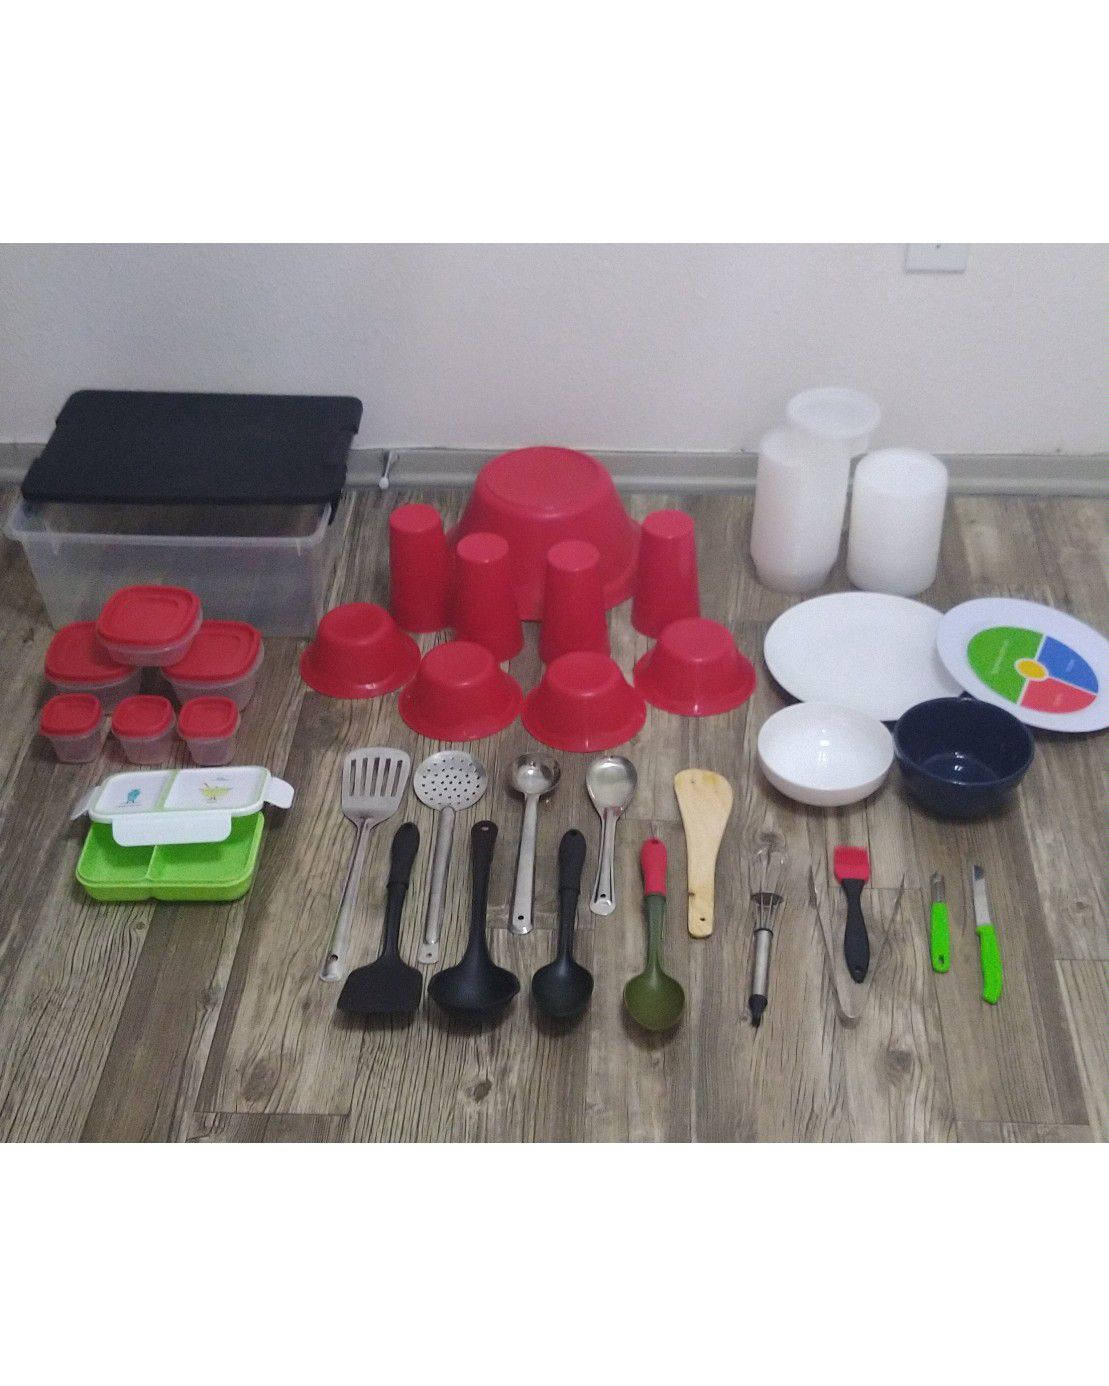 Move out sale : kitchen items